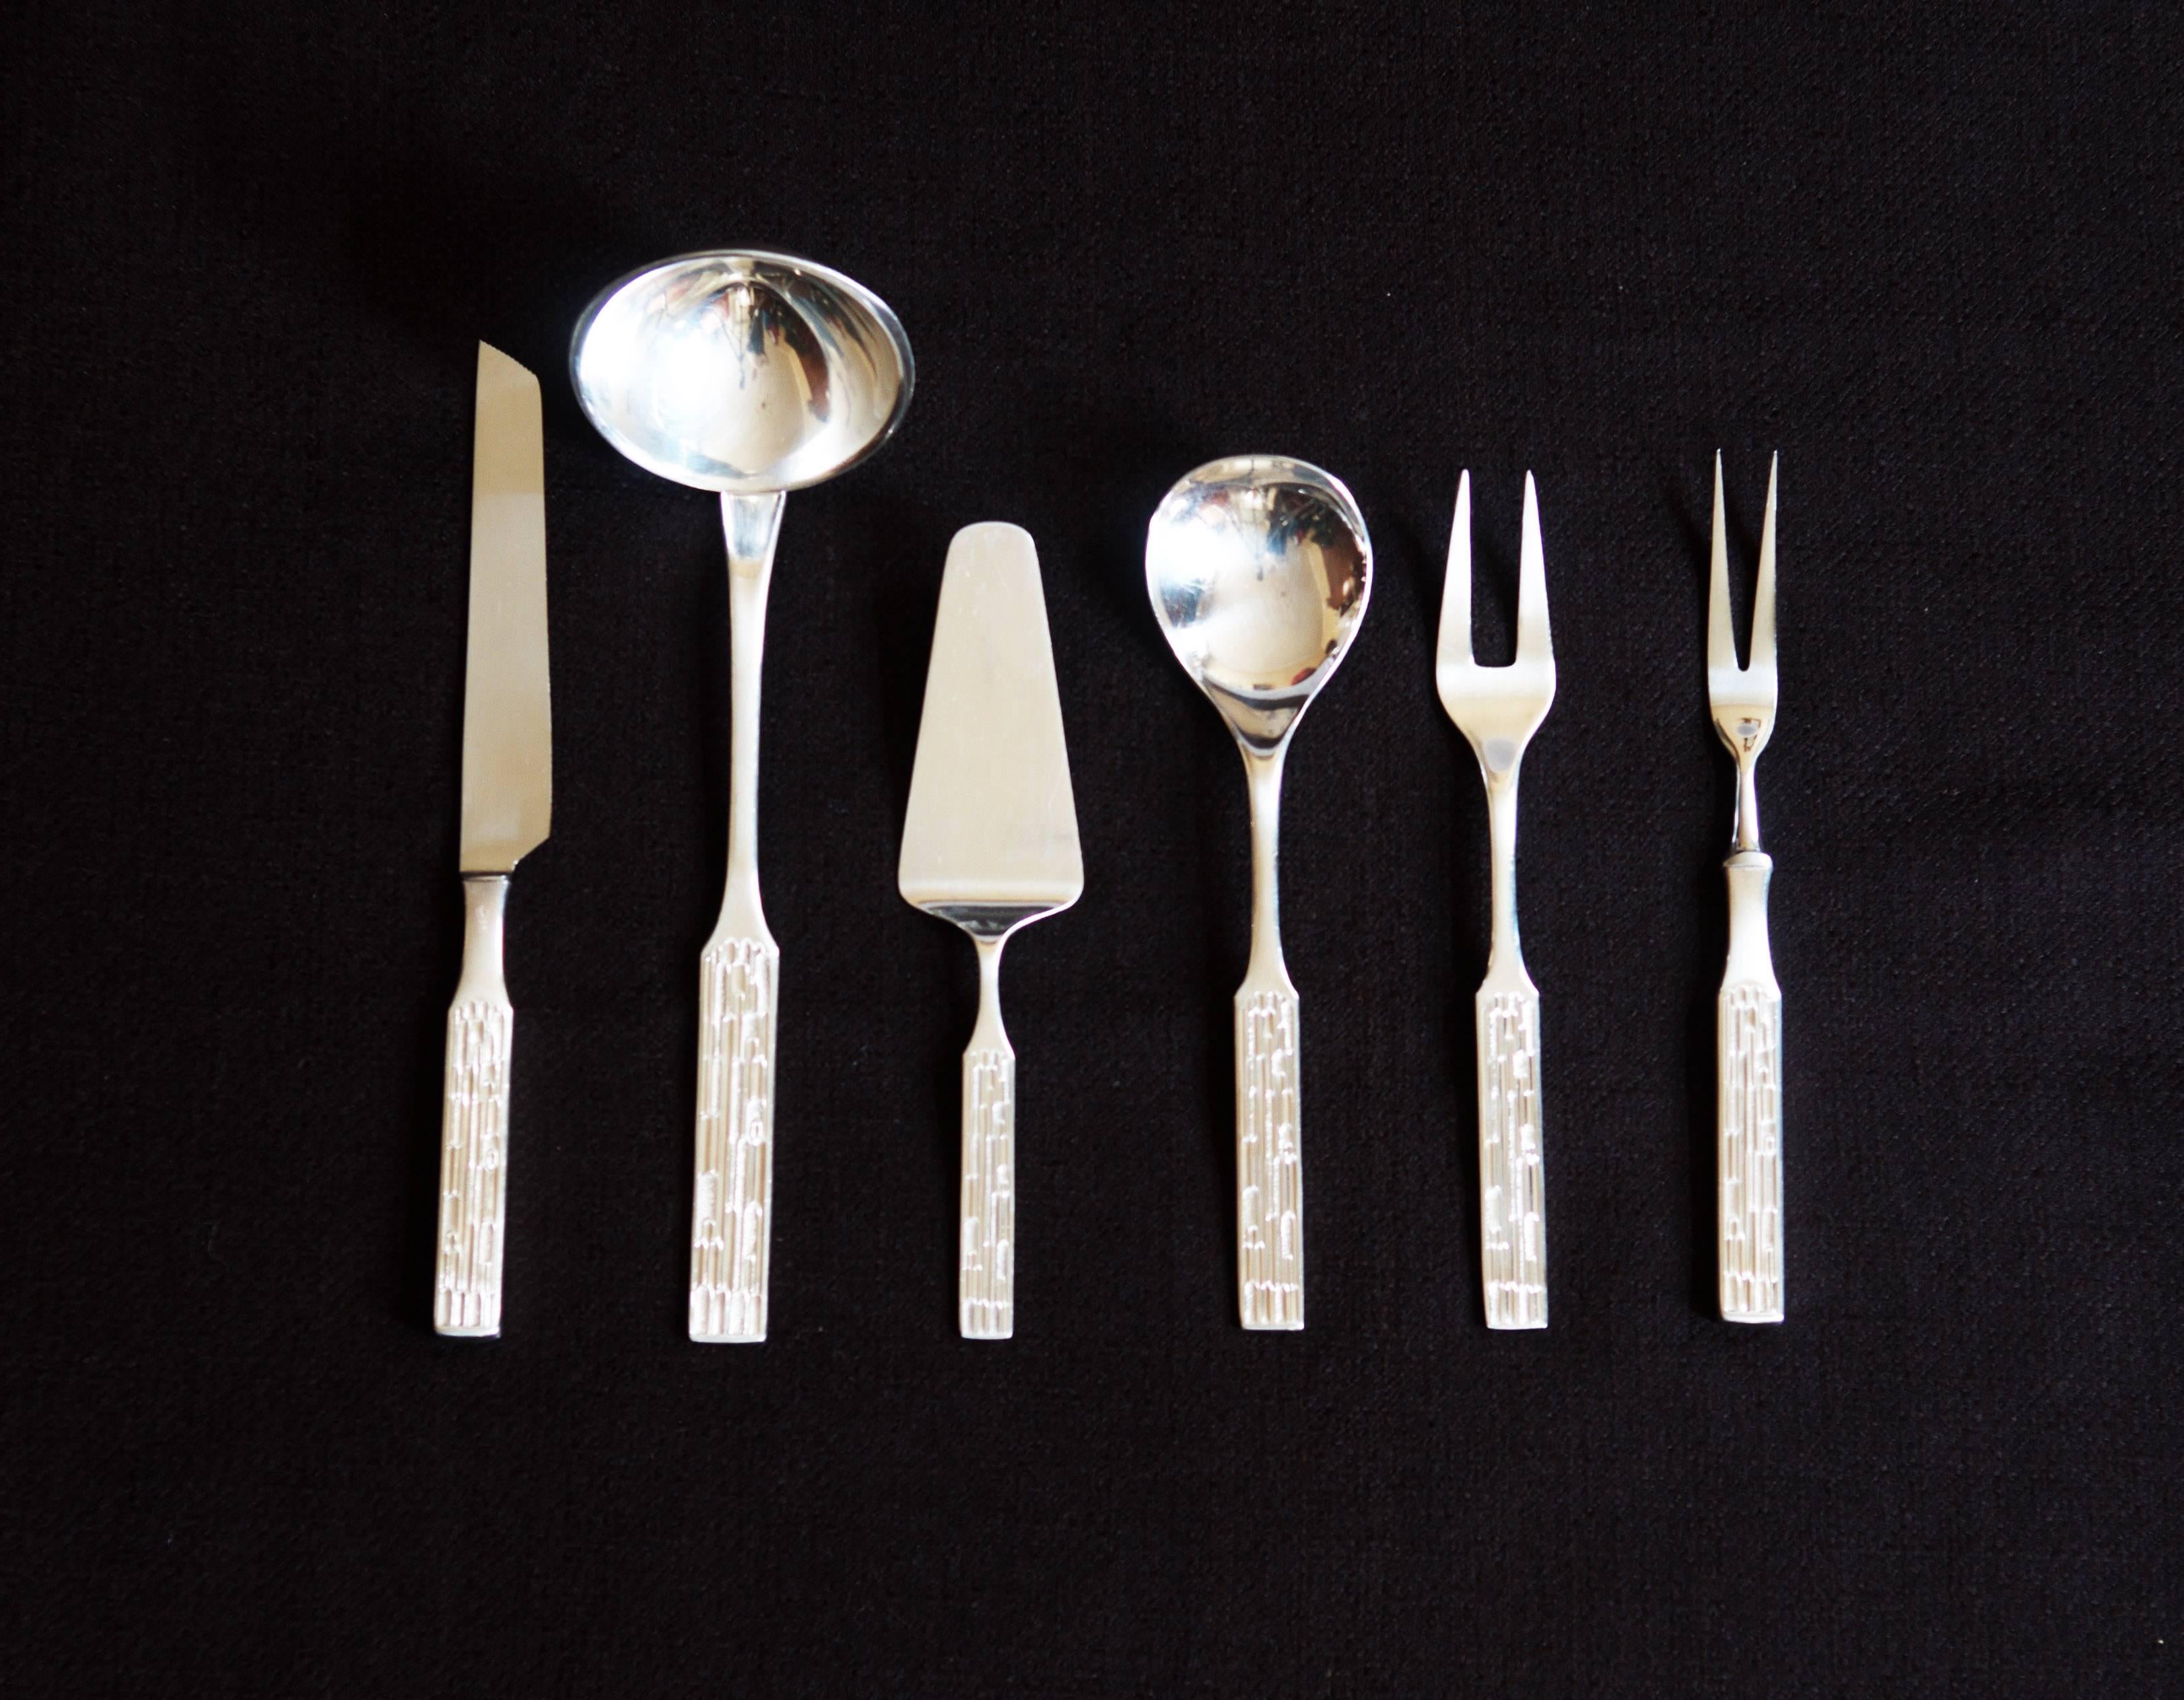 Austrian high quality flatware silverplated 90 by Berndorf, former Krupp company from the 1970s. The cutlery has handle with very interesting geometric decor. Used but in excellent condition, some in near new condition.
Unfortunately some of the